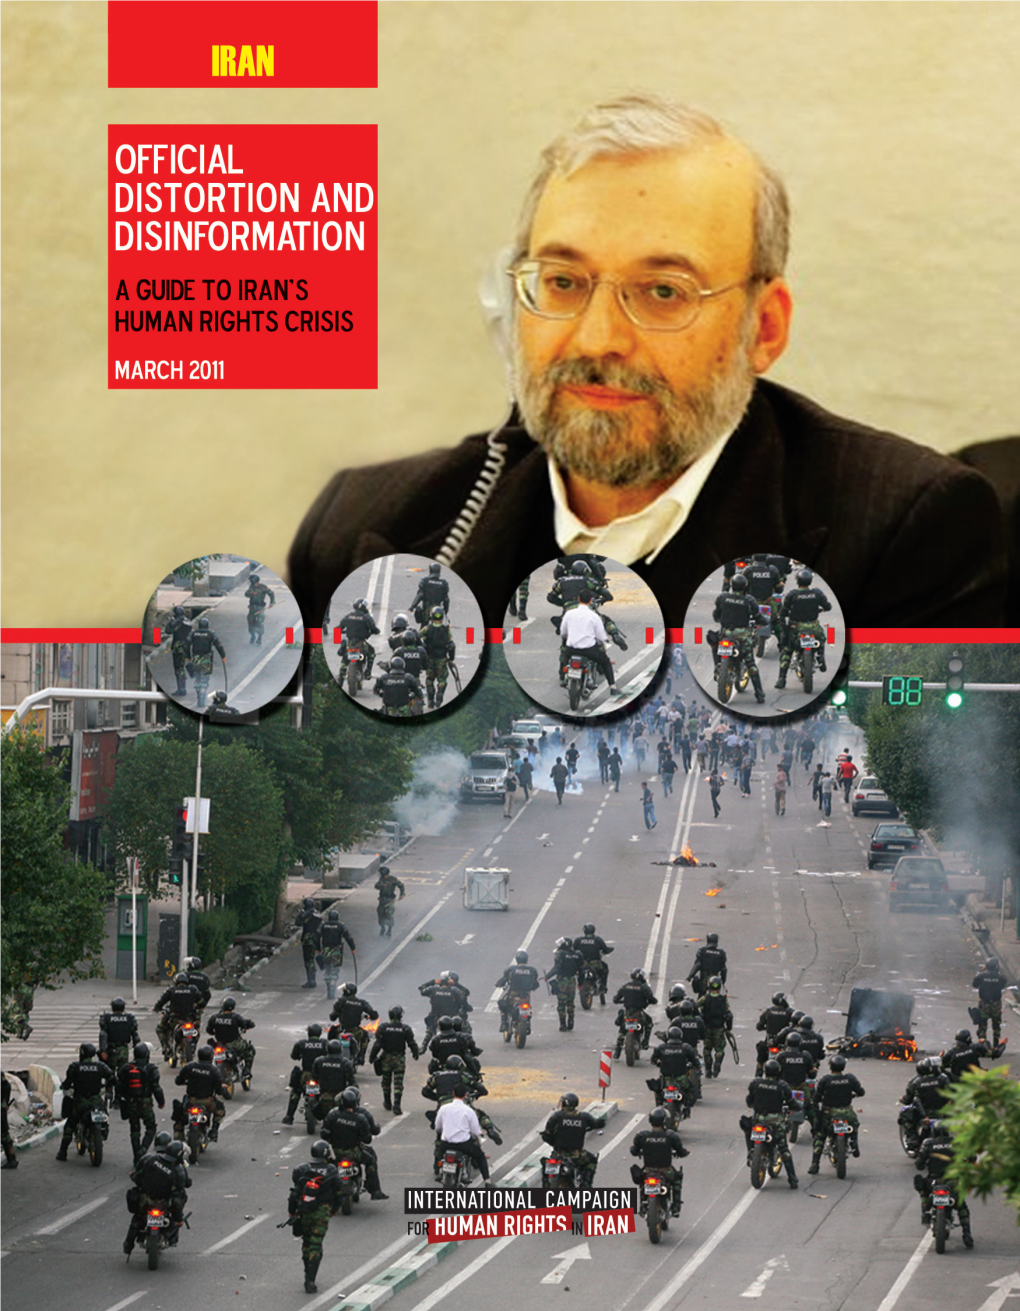 Official Distortion and Disinformation: a Guide to Iran's Human Rights Crisis